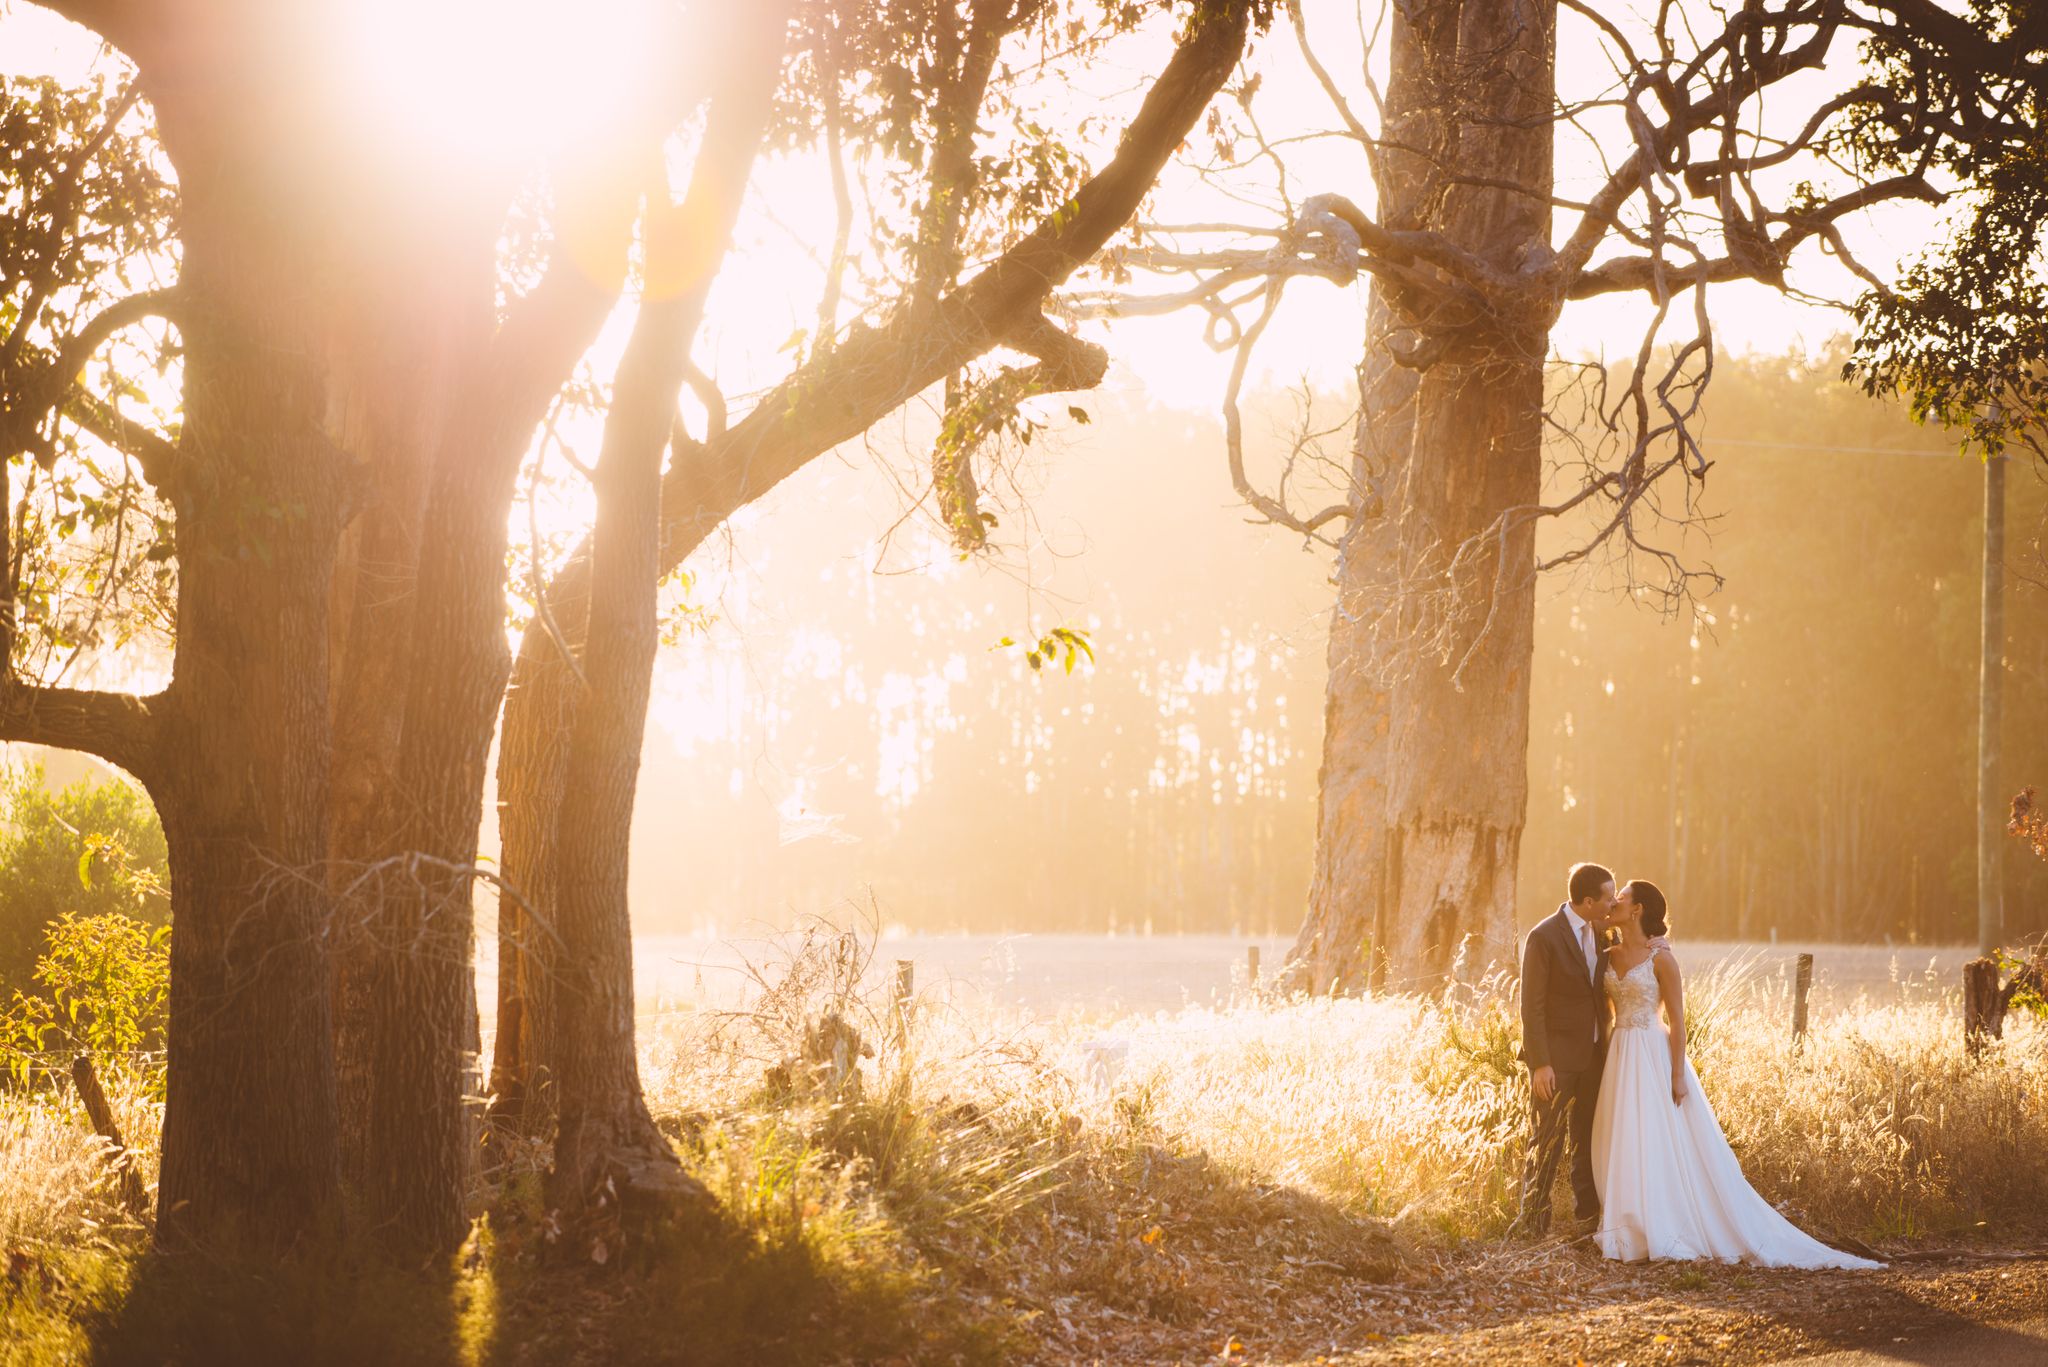 Wedding couple at sunset. Credit Russell Ord.